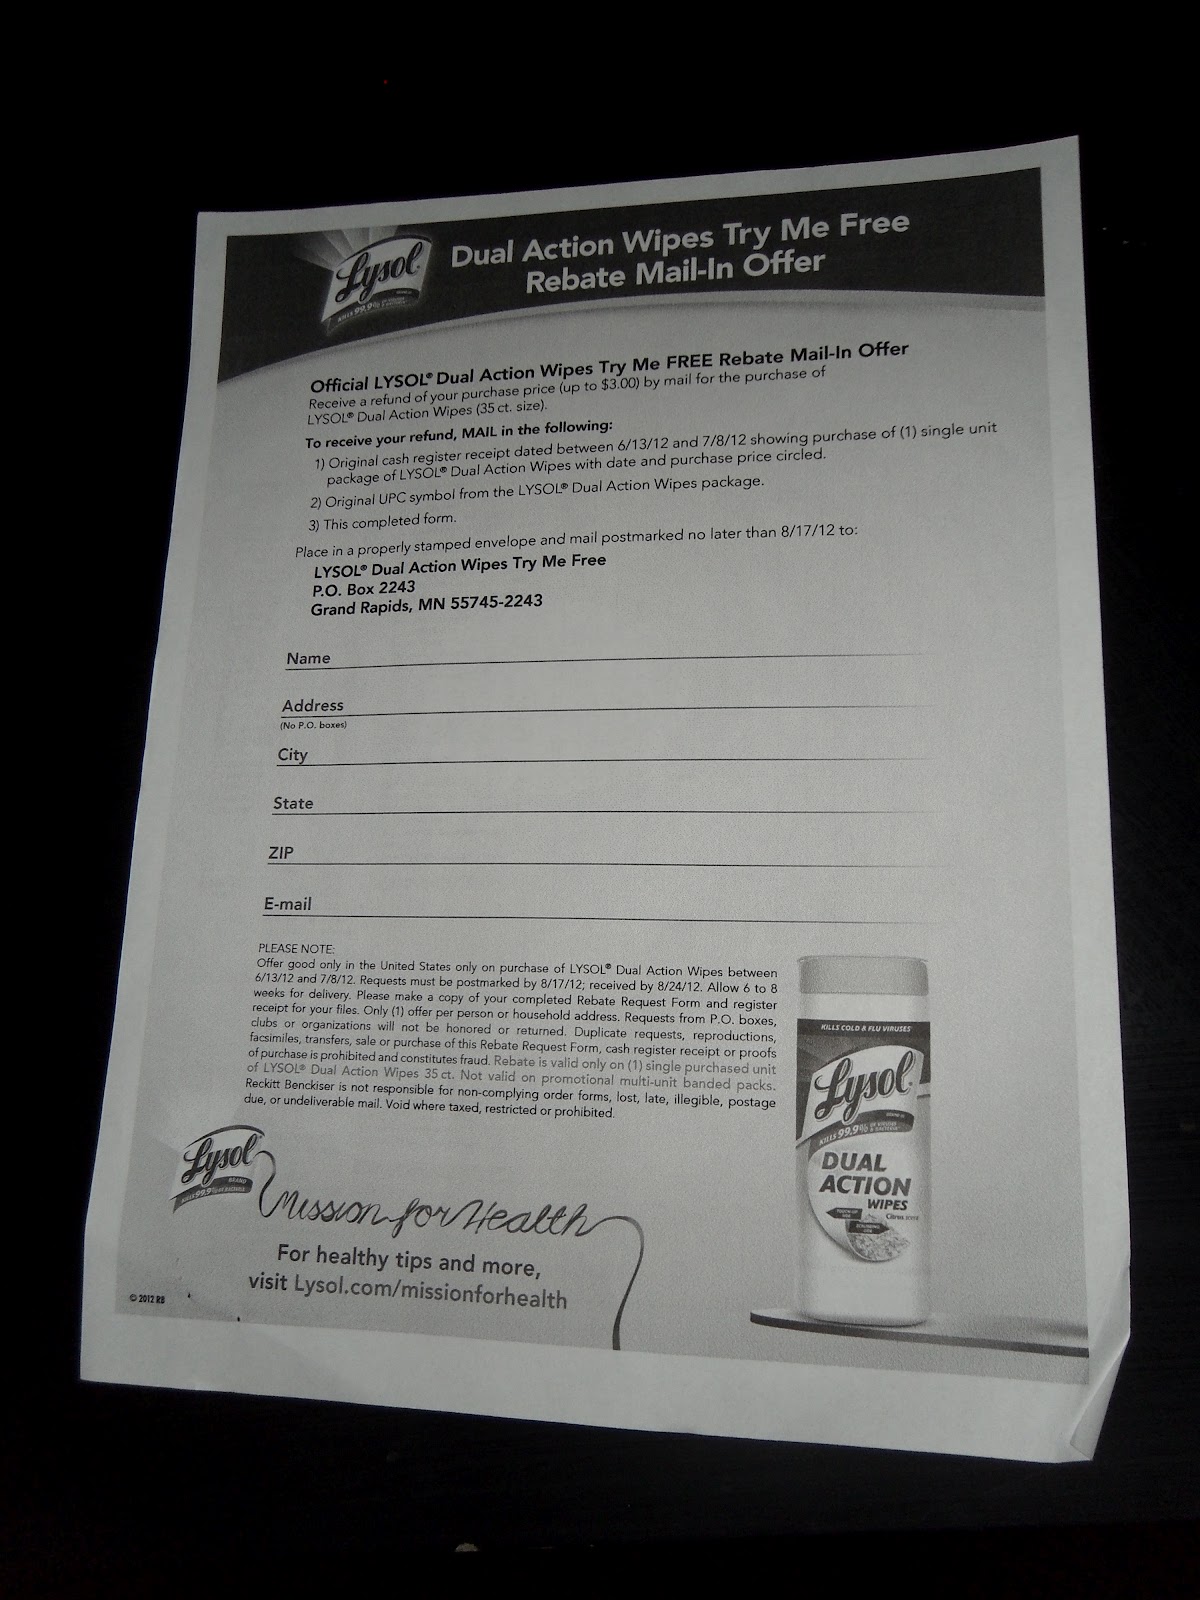 provo-22nd-relief-society-deal-of-the-week-free-lysol-dual-action-wipes